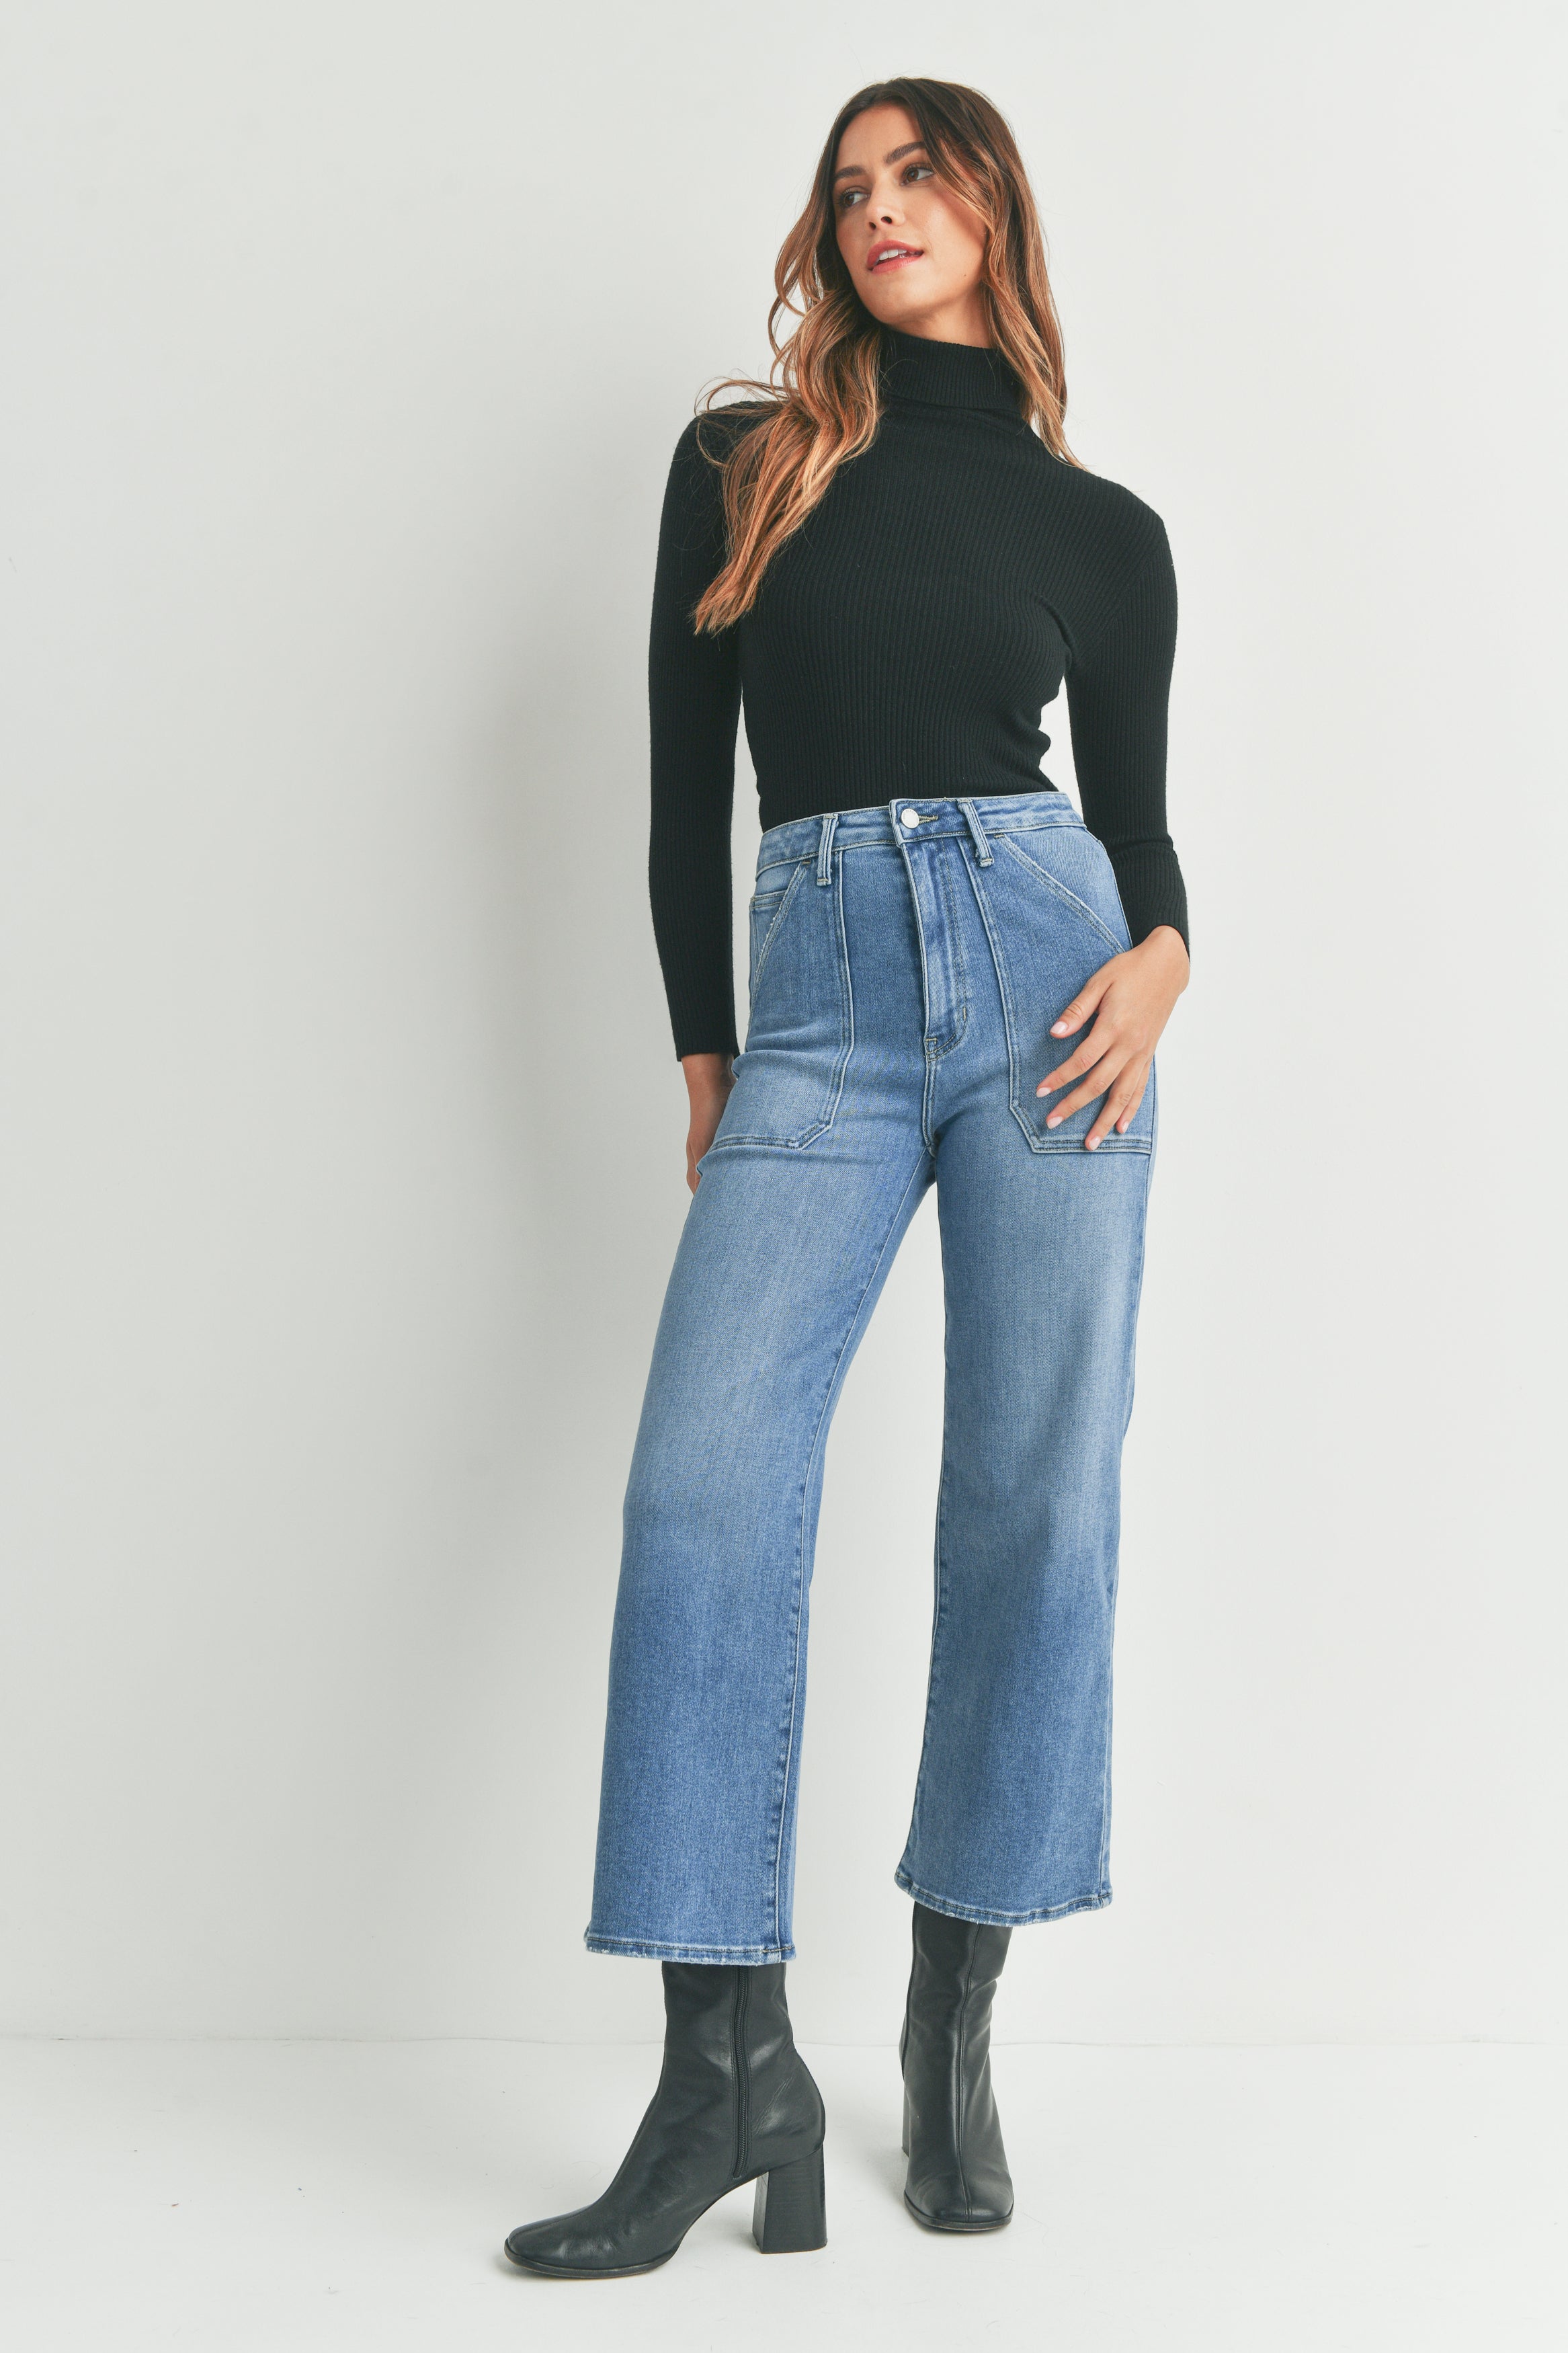 Just Black denim express utility jeans – The Girl's Style Boutique